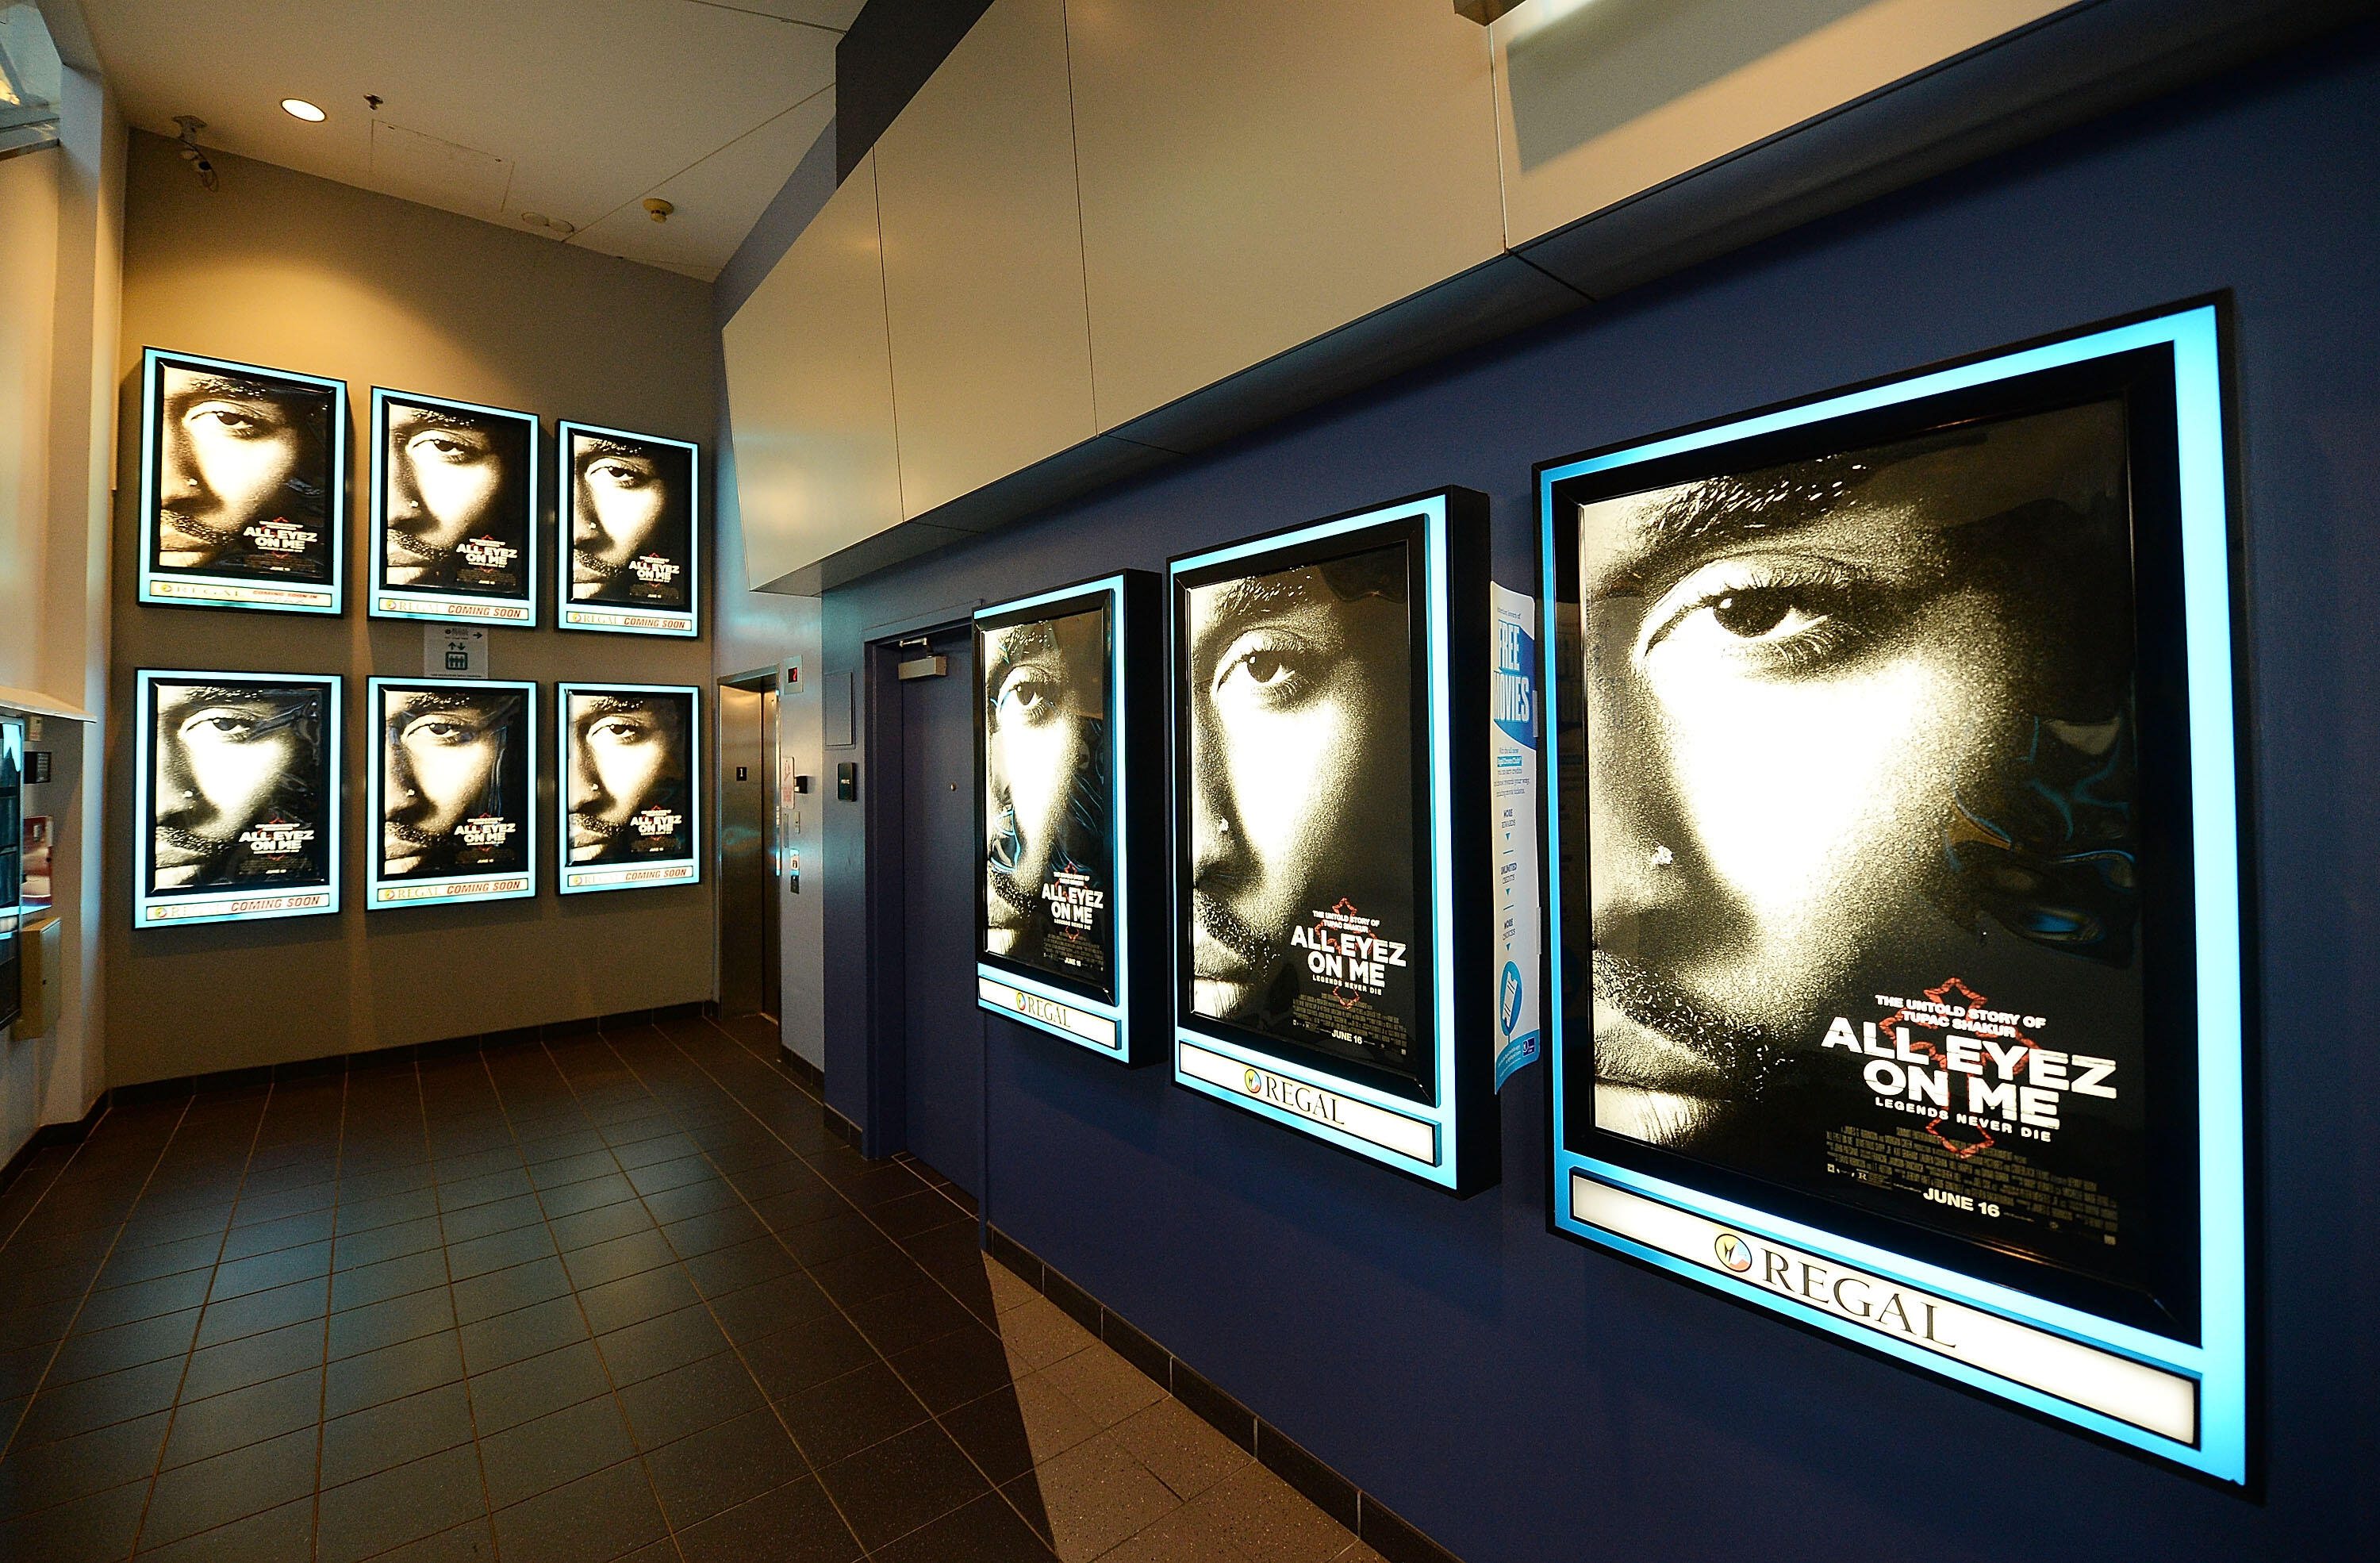 MIAMI BEACH, FL - JUNE 17:  Movie posters on display at the All Eyez on Me ABFF Screening at Regal South Beach Cinema on June 17, 2017 in Miami Beach, Florida.  (Photo by Jason Koerner/Getty Images for Codeblack Films)